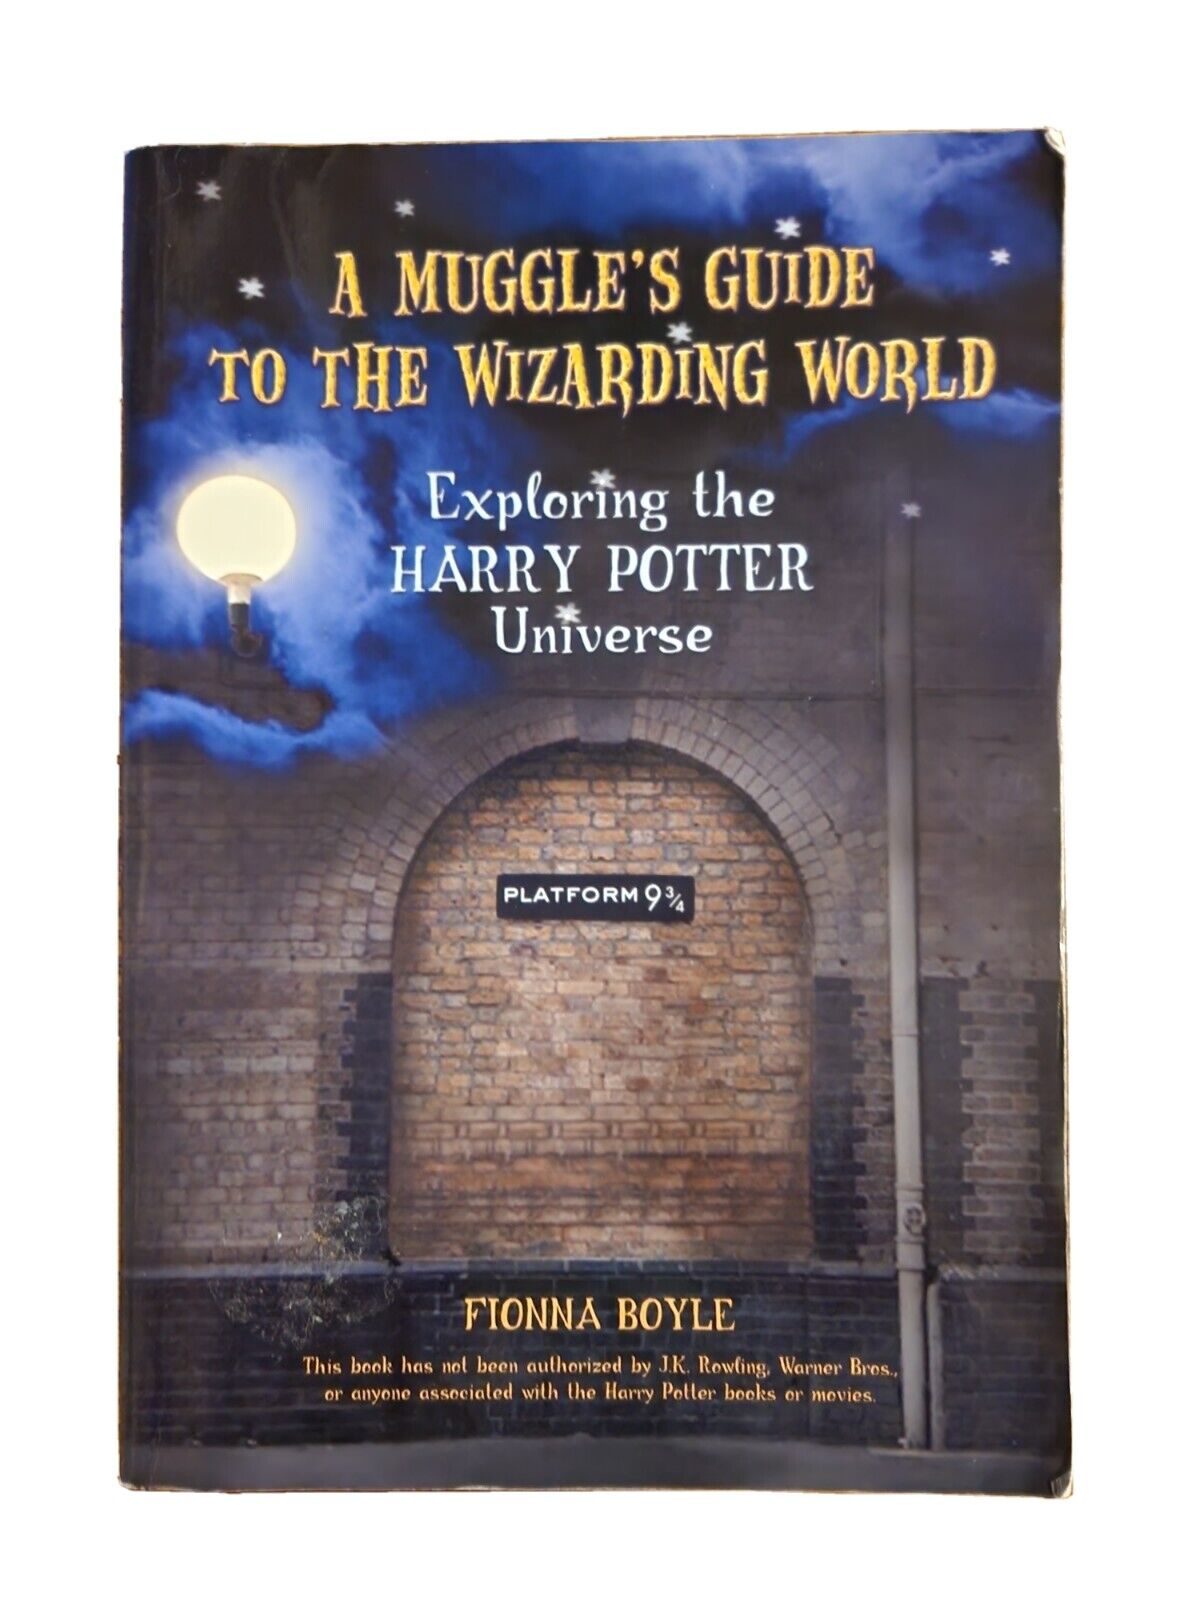 The Harry Potter Movies: A Guide to Wizarding World Mythology 2